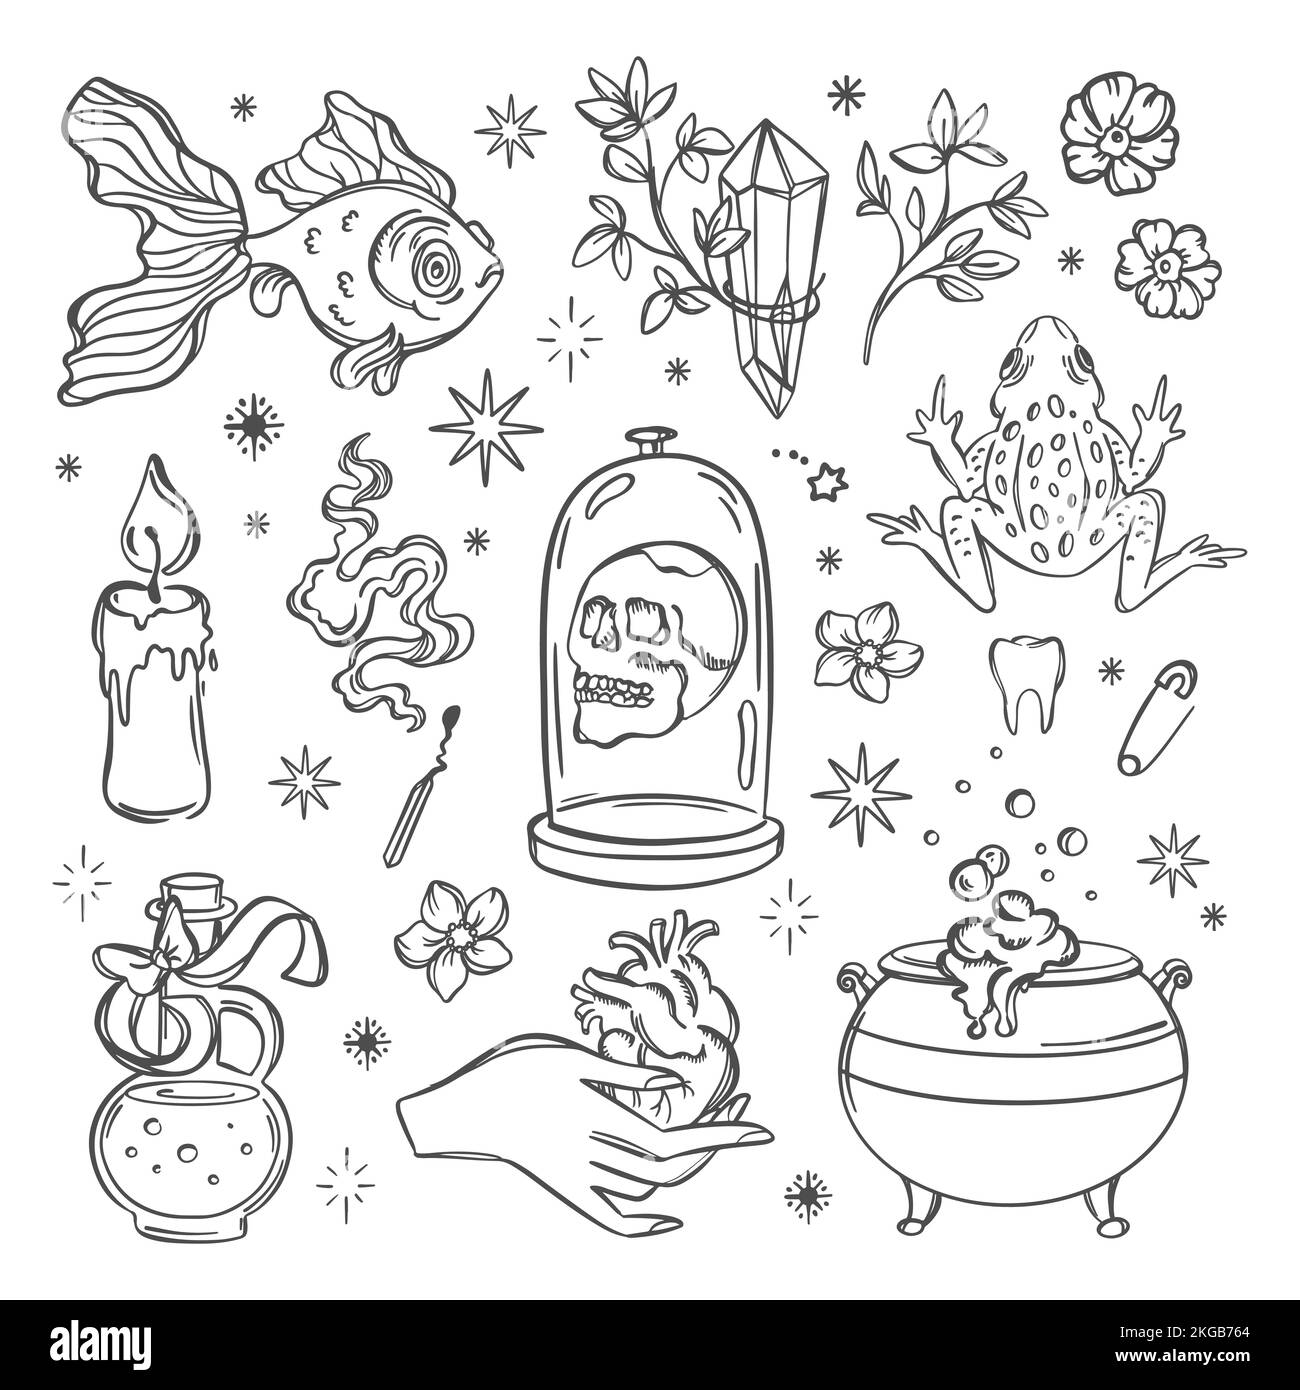 ESOTERIC SYMBOLS Monochrome Witchcraft Element Love Magic Alchemic Astrology Occult Mystery Doodle Sketch Set Hand Drawn Collection For Designers And Stock Vector